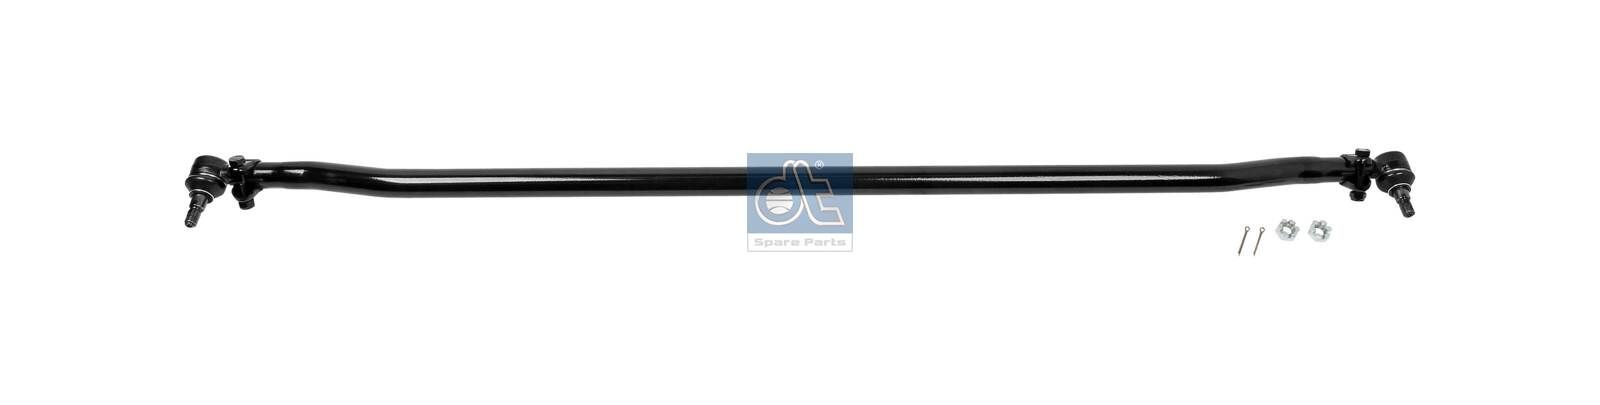 DT Spare Parts 4.67440 Rod Assembly A 602 330 04 03